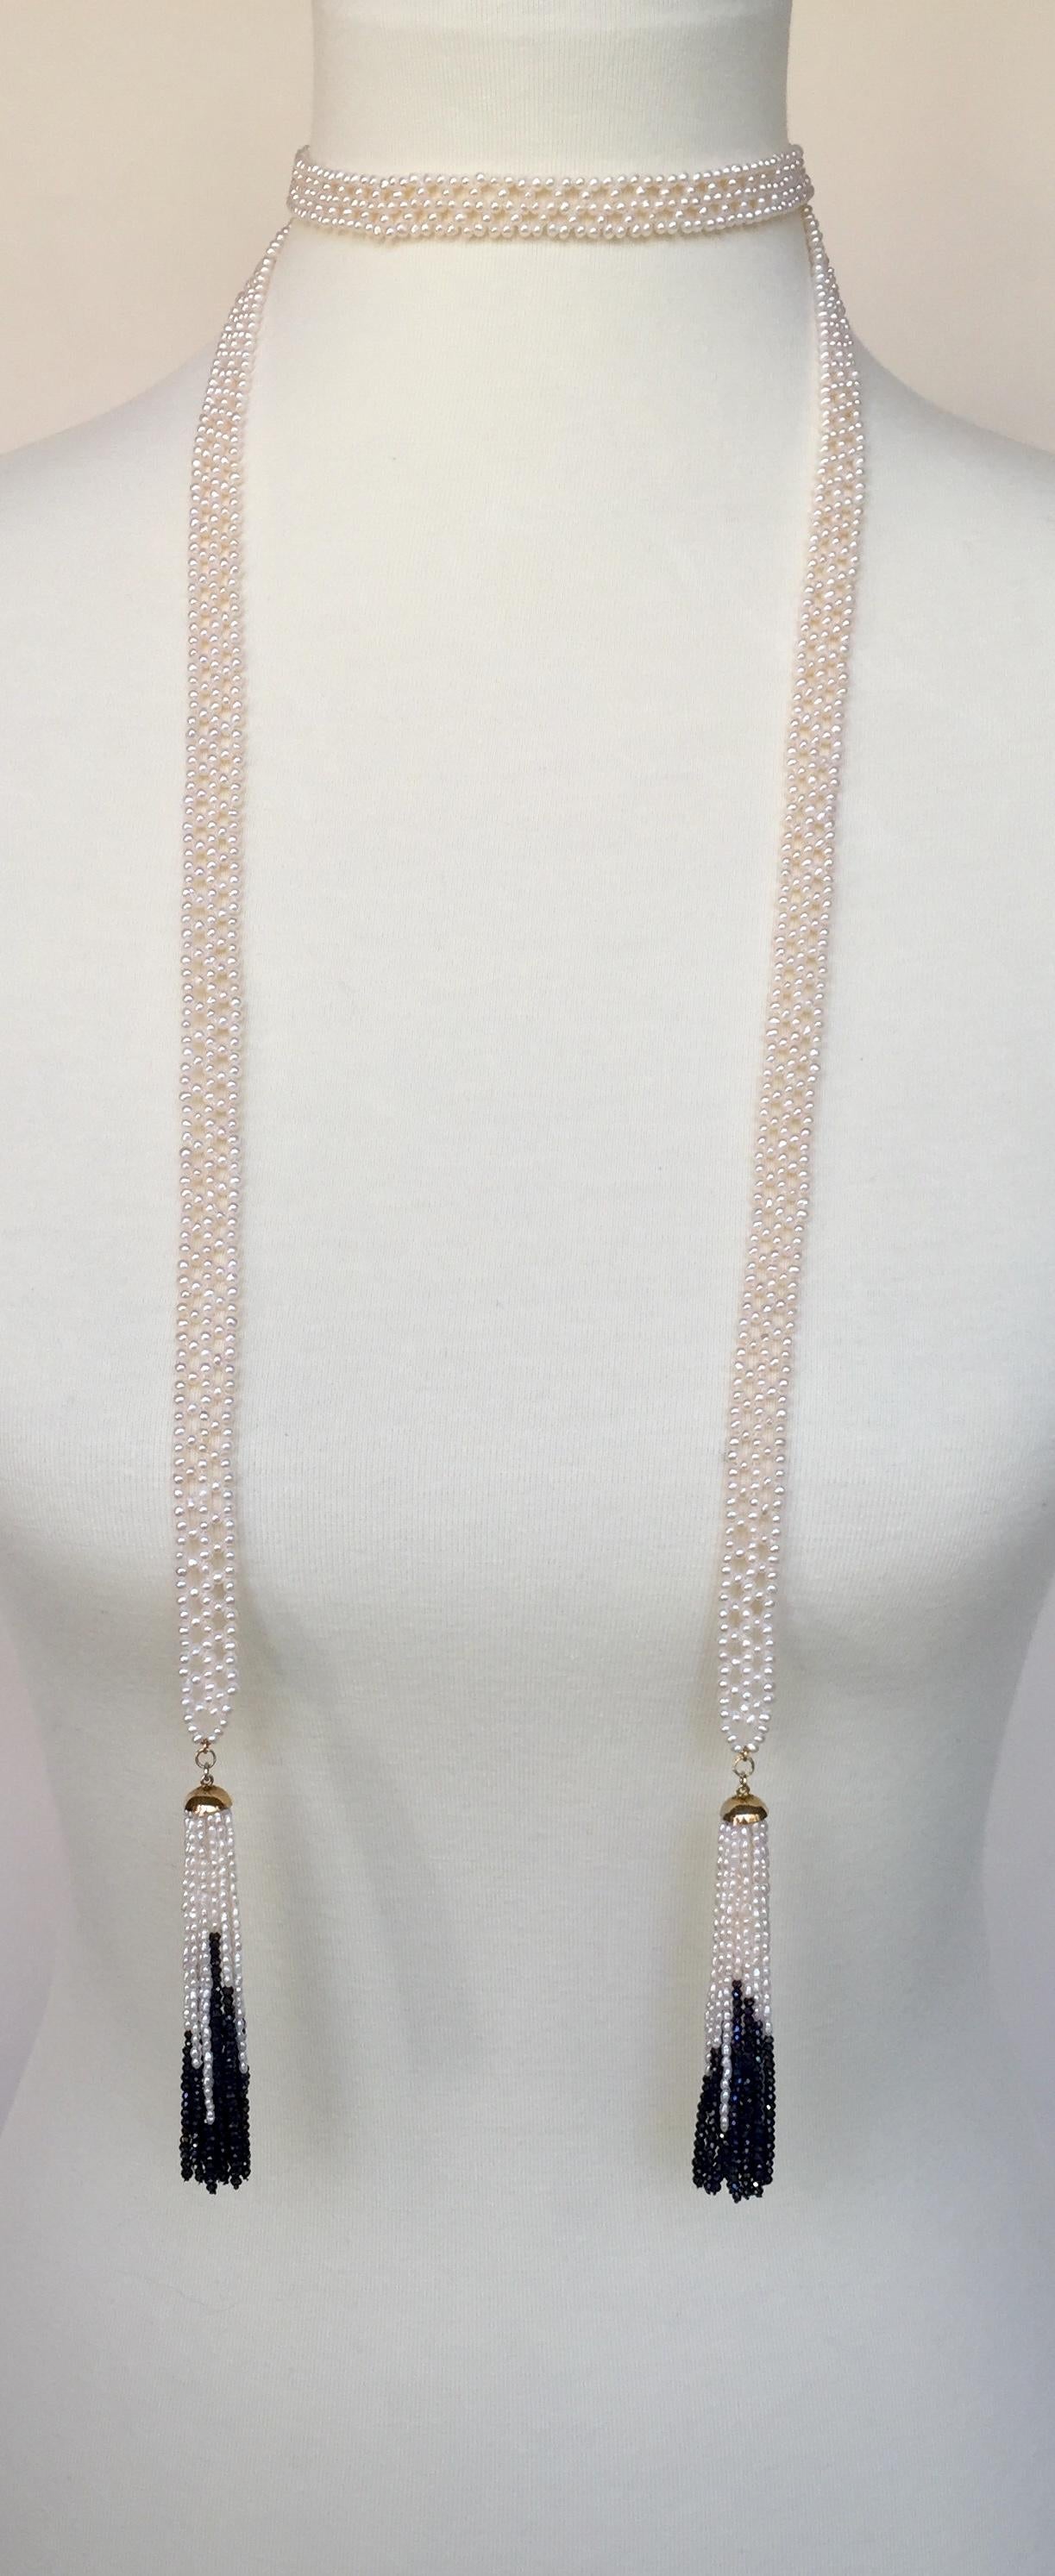 Woven White Pearl Sautoir with 14 Karat Gold, Pearl, and Black Spinel Tassels im Zustand „Neu“ in Los Angeles, CA